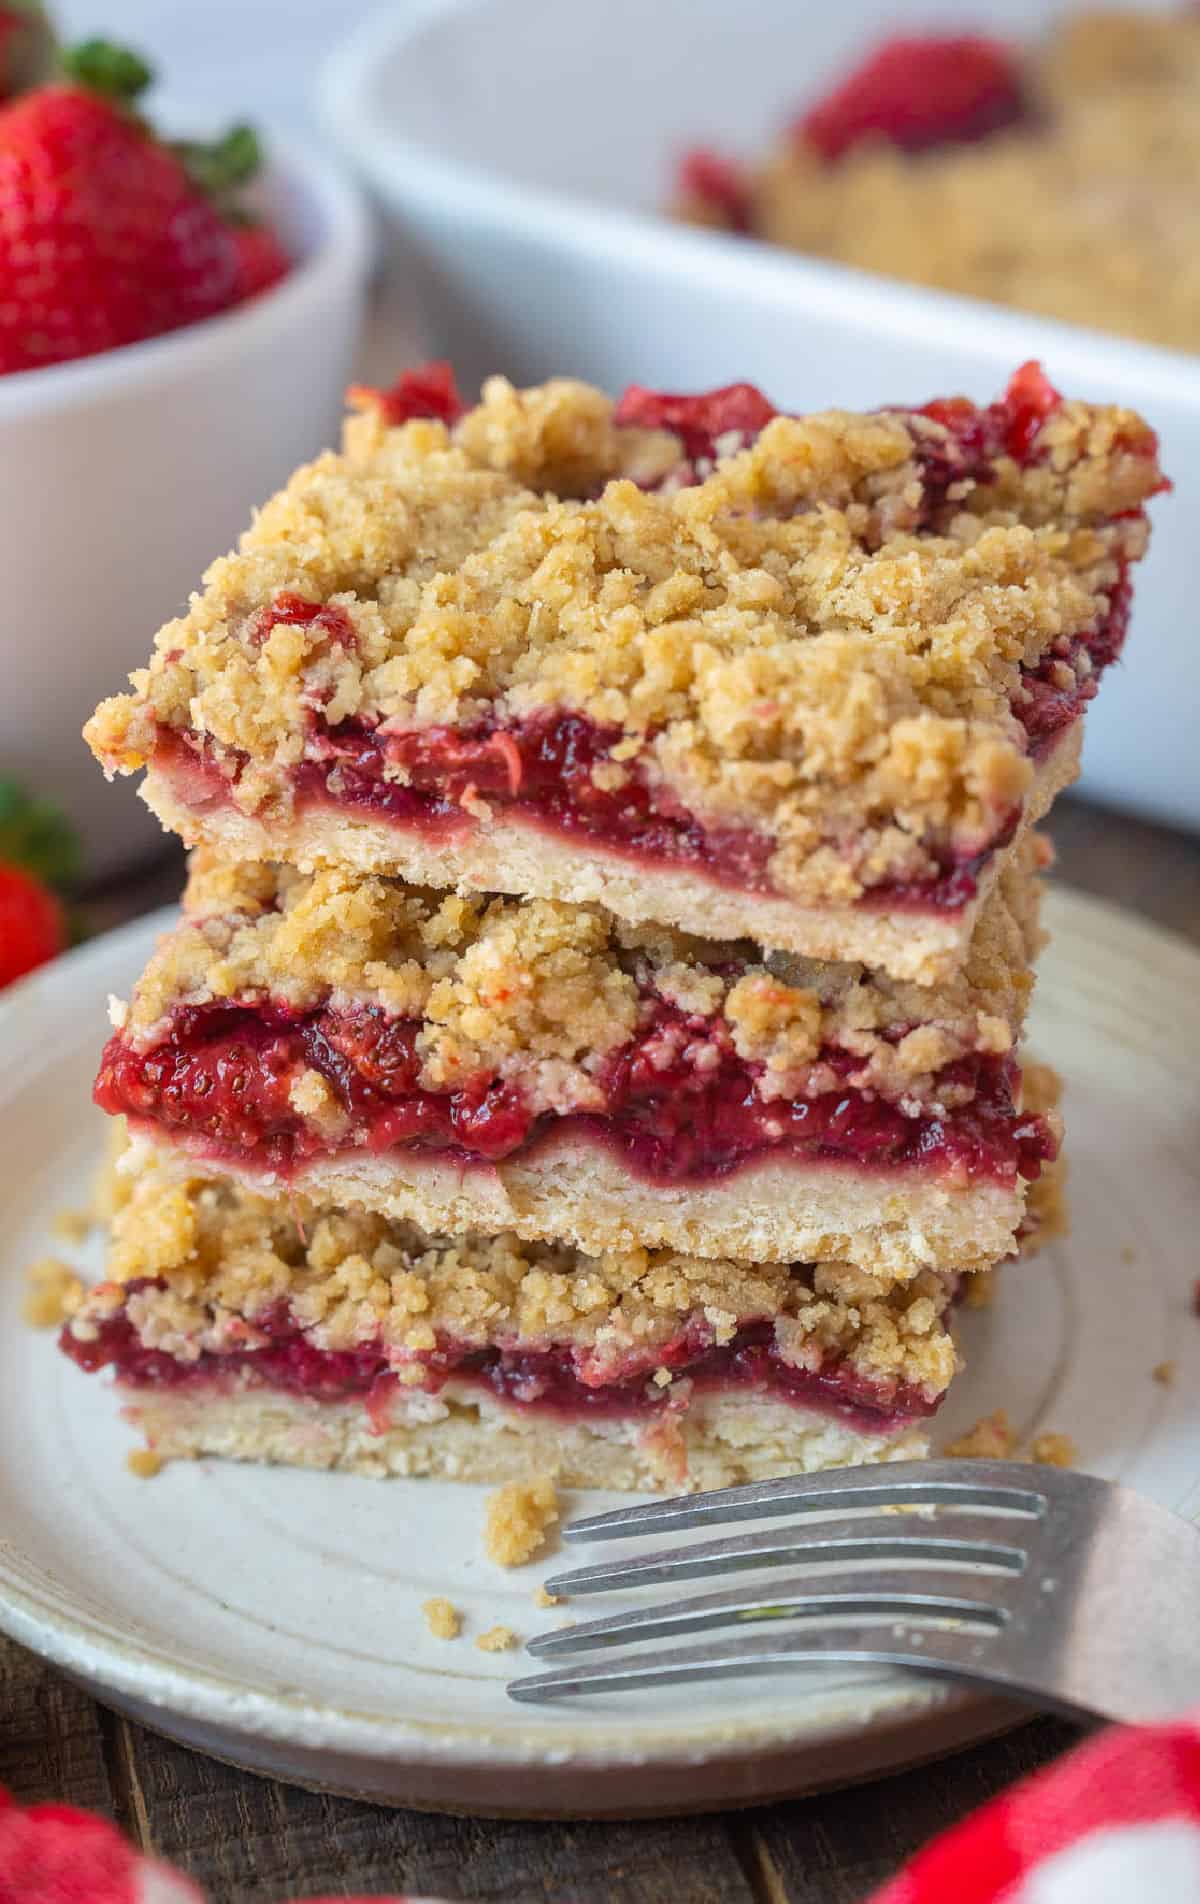 Three strawberry bars stacked on a plate.